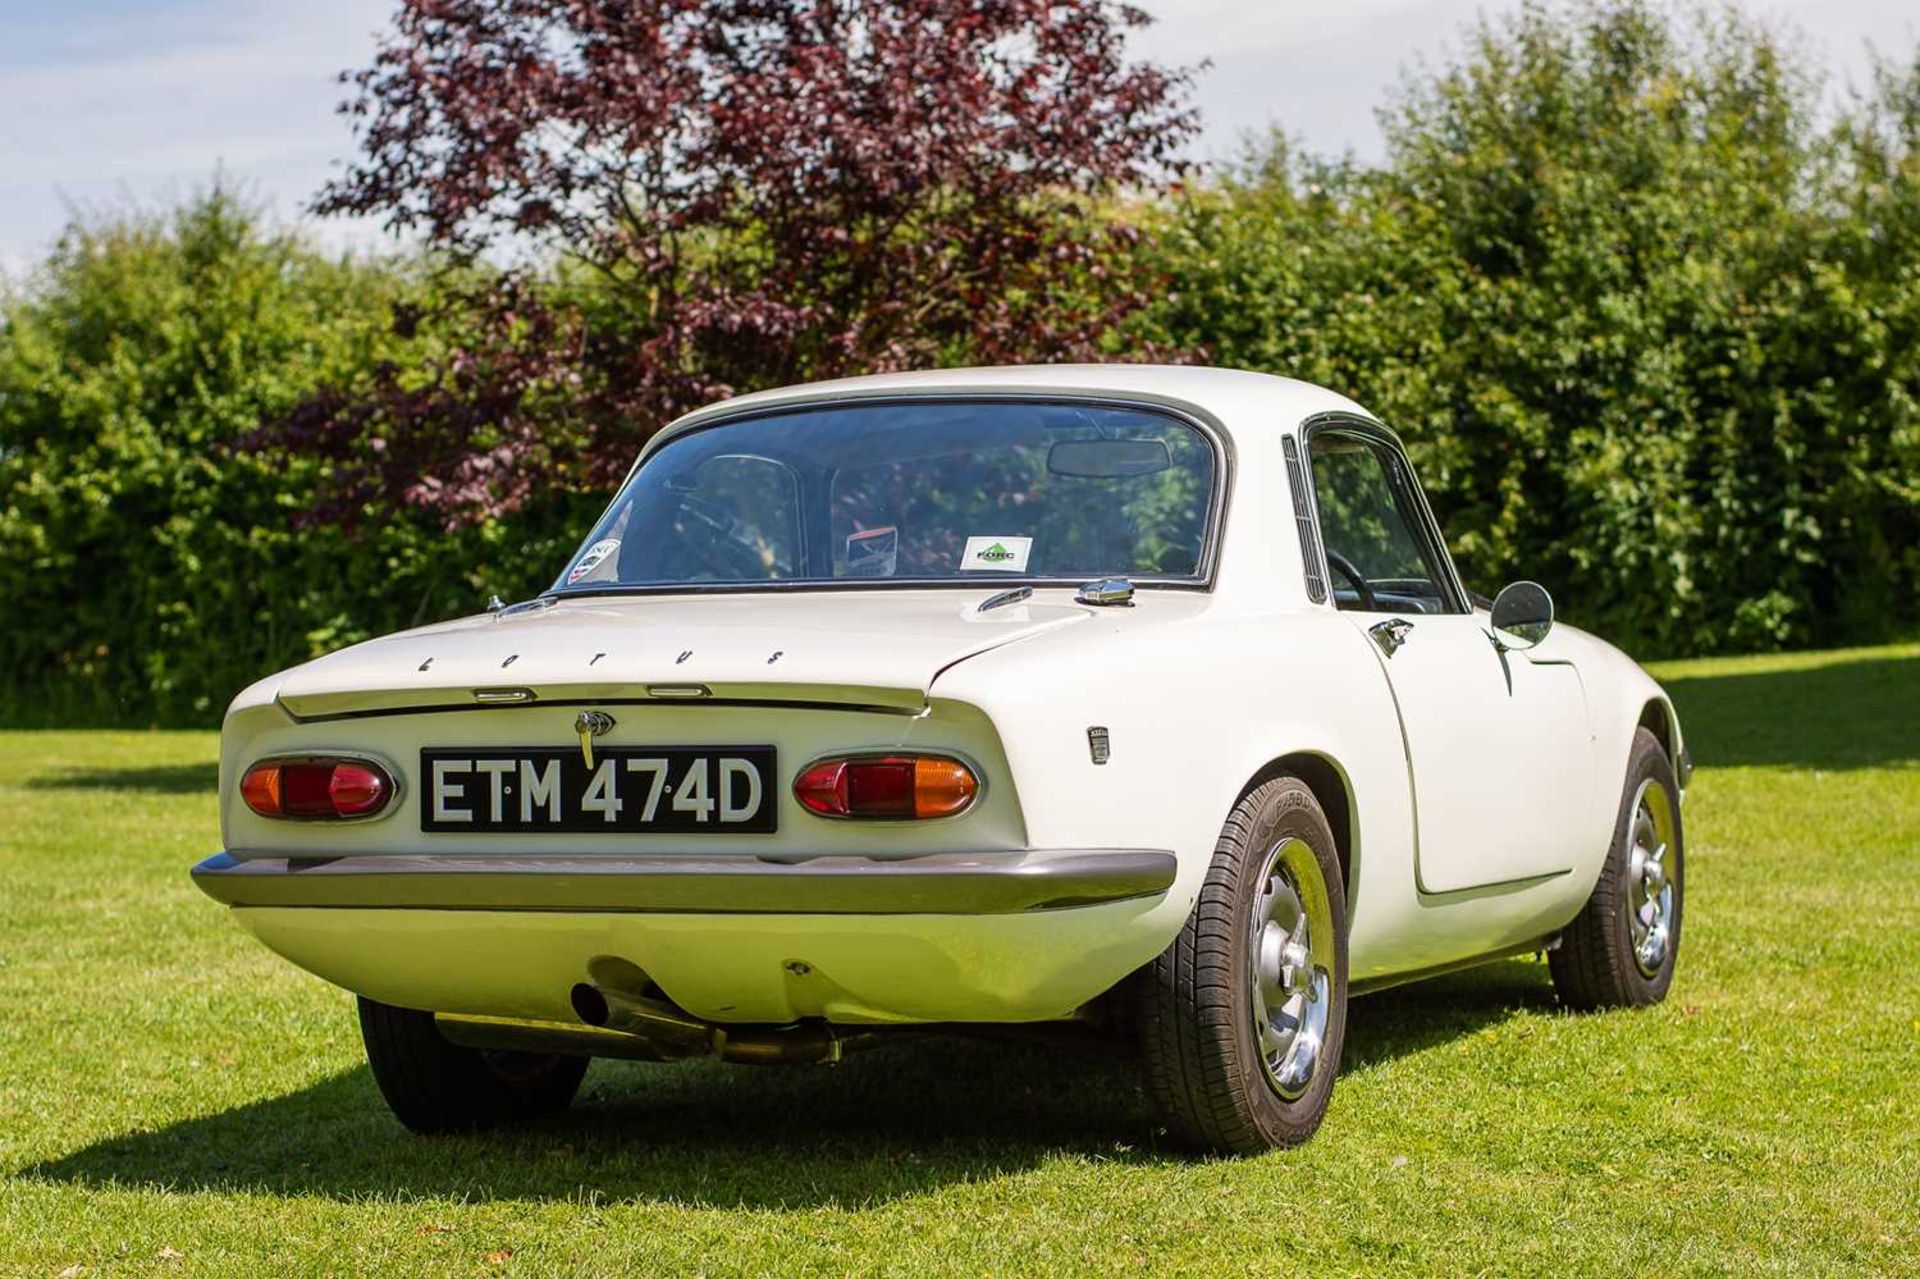 1966 Lotus Elan Fixed Head Coupe Sympathetically restored, equipped with desirable upgrades - Image 17 of 100